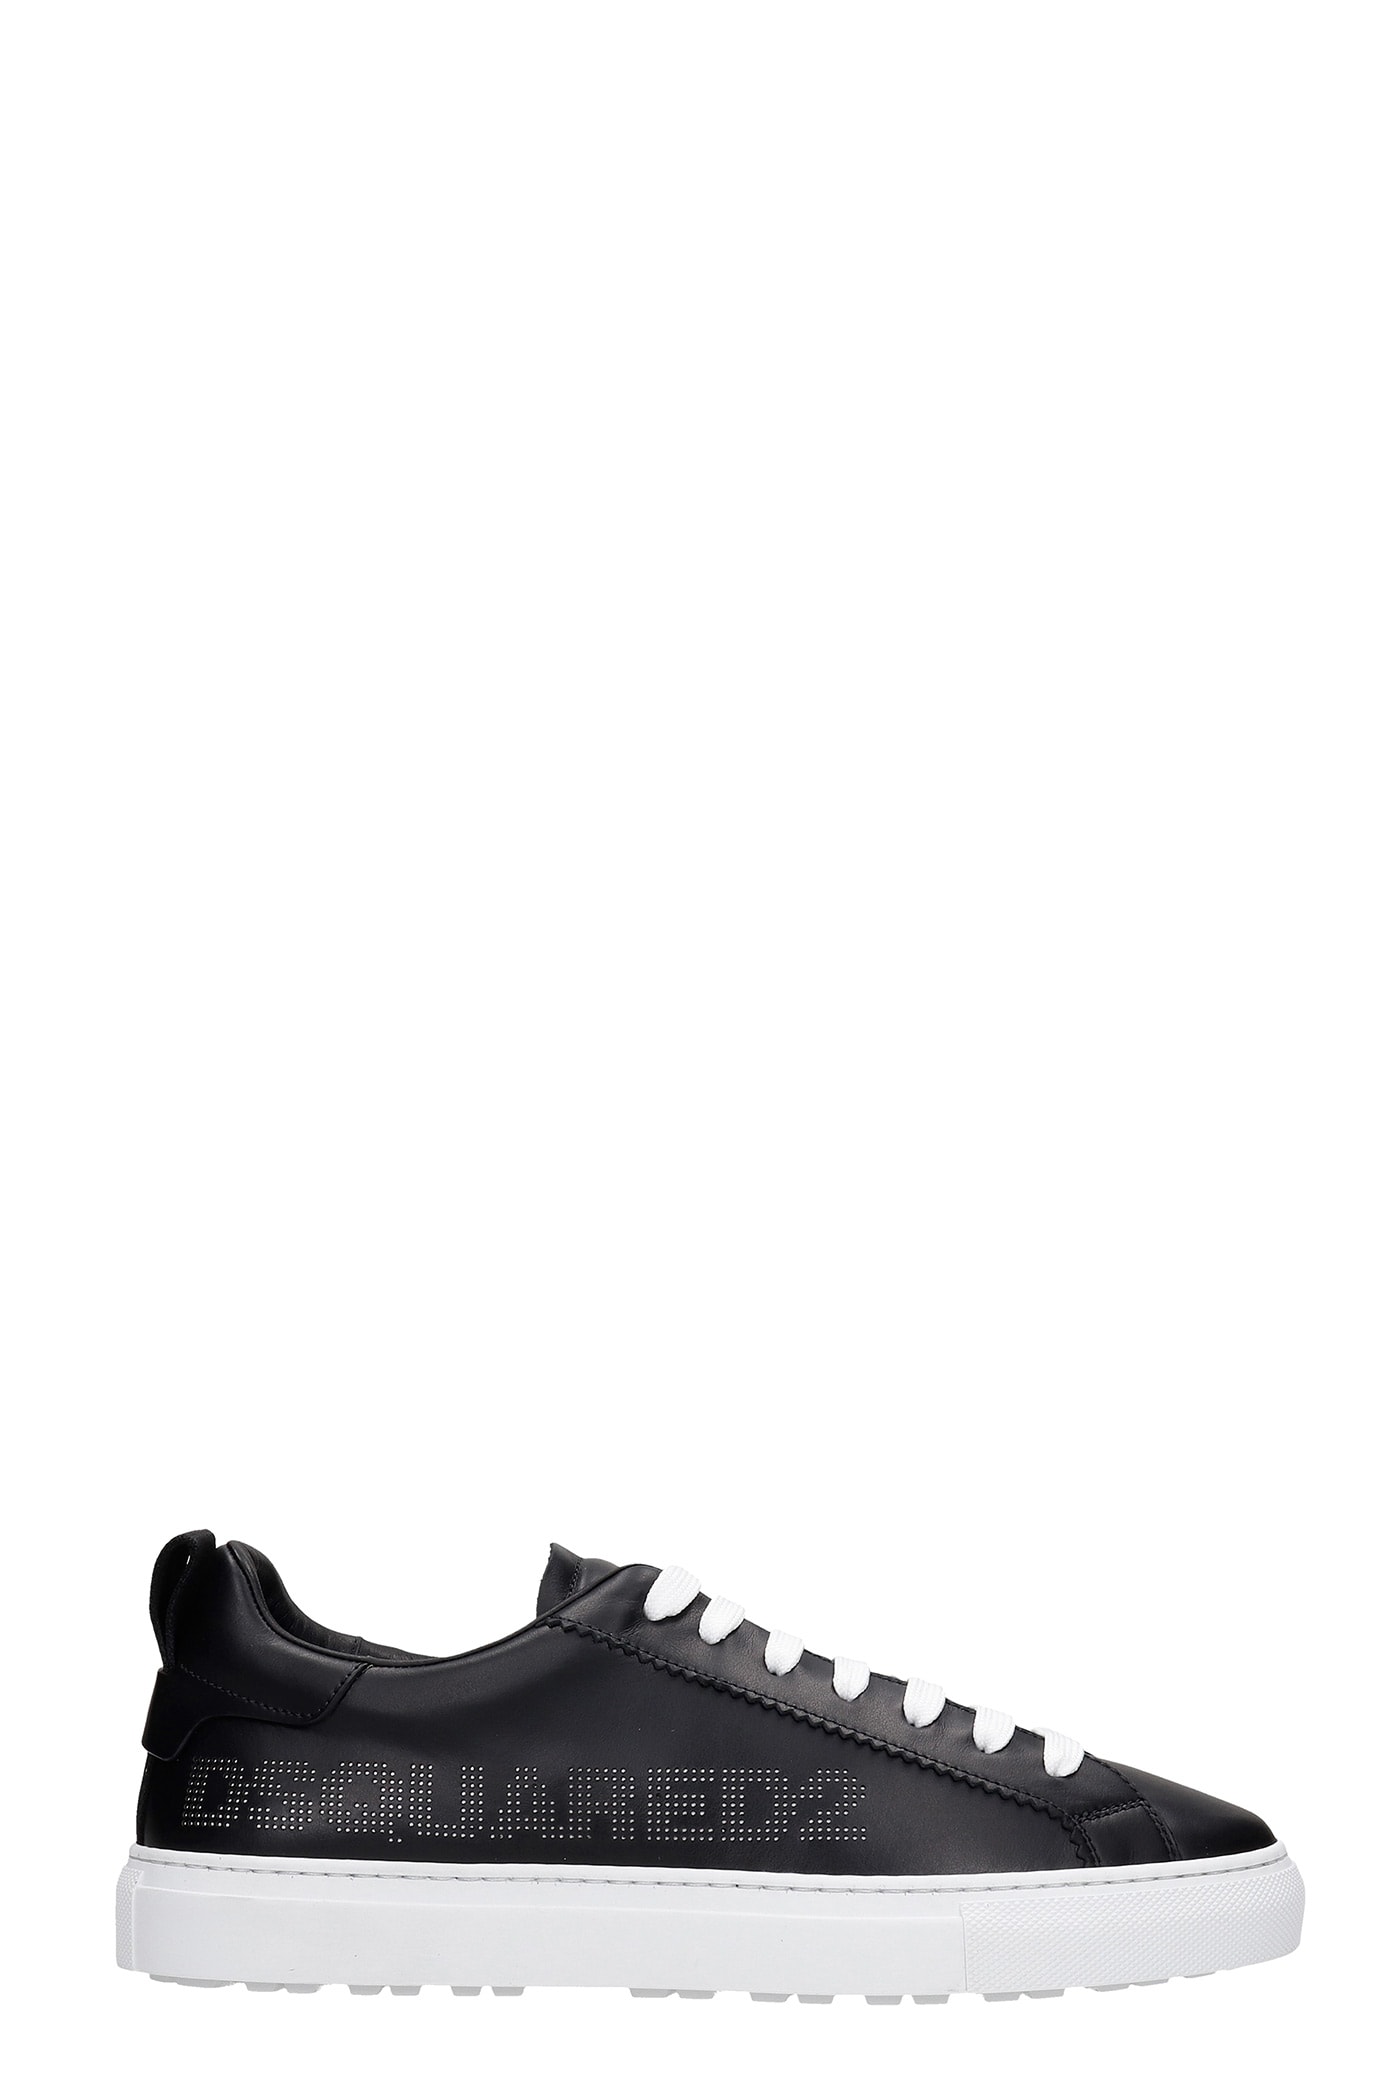 Dsquared2 San Diego Sneakers In Black Leather